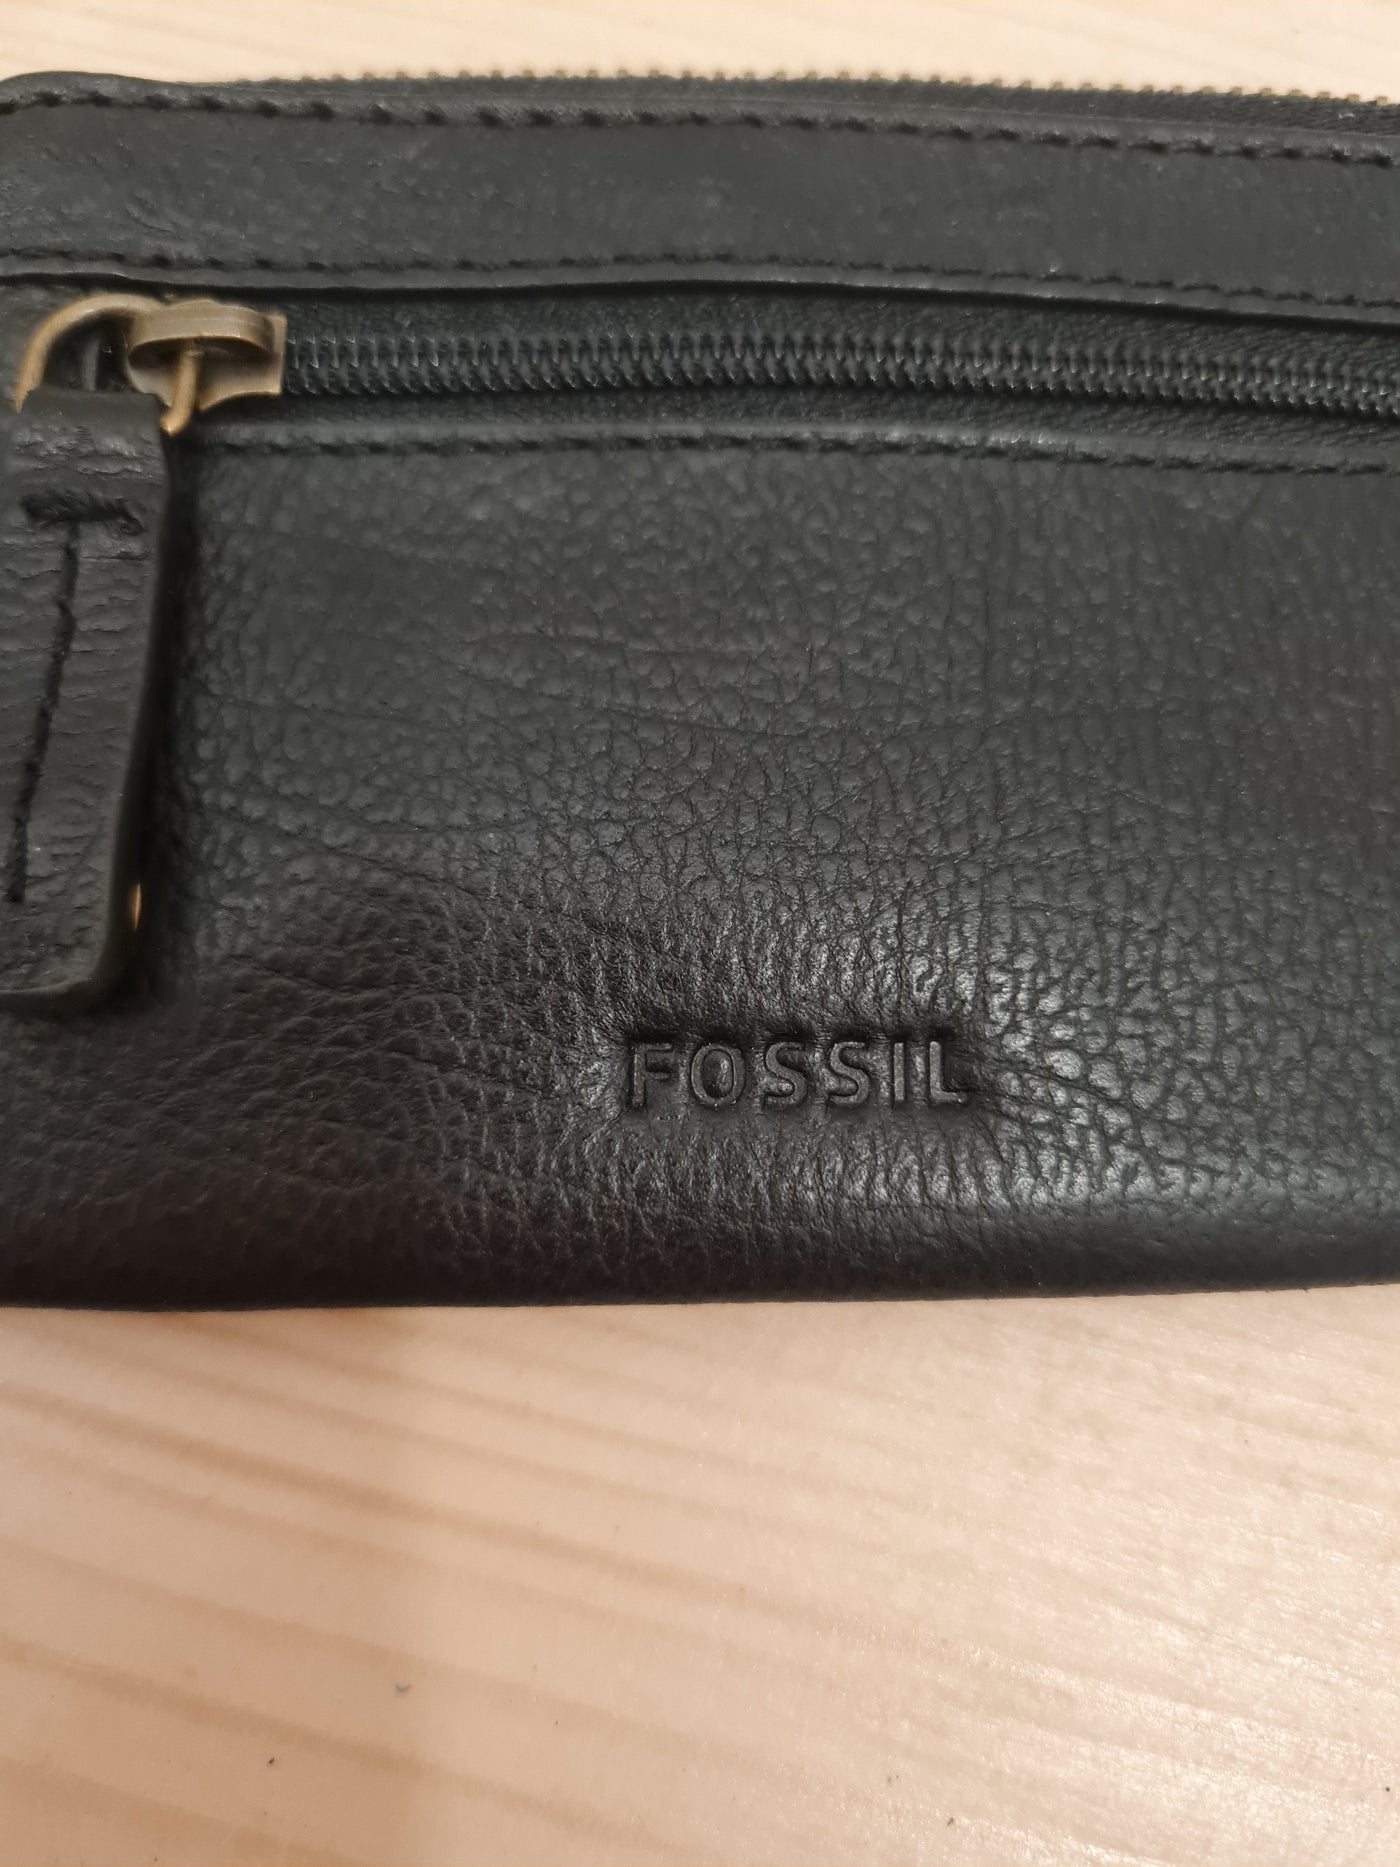 Fossil Black Leather Coin Purse New RRP £35